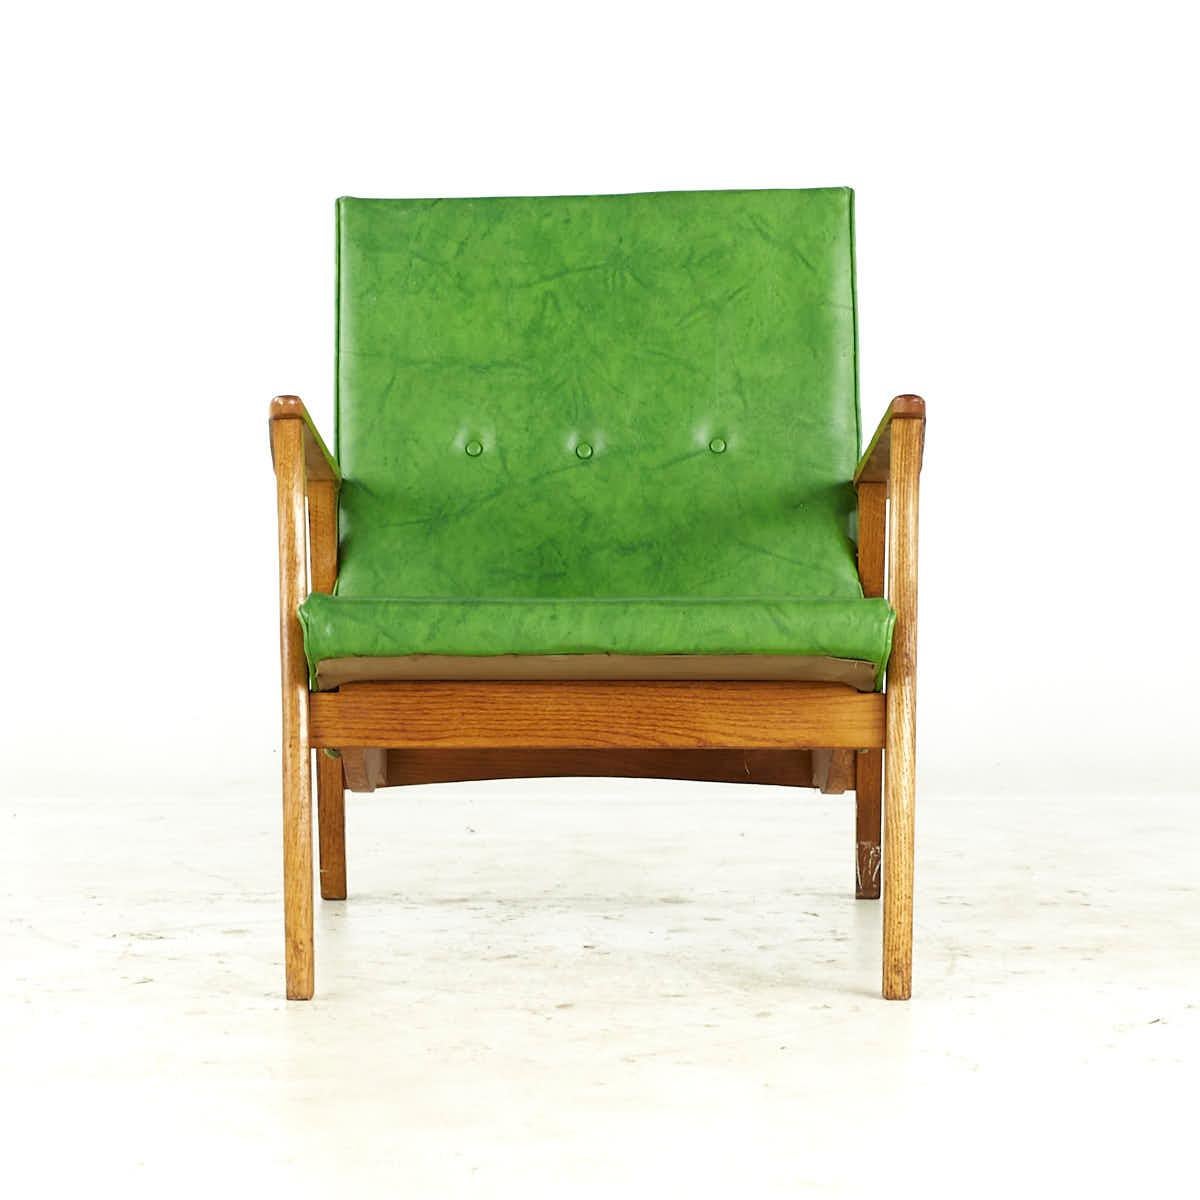 SOLD 08/07/23 Milo Baughman Mid Century Green Scoop Lounge Chairs – Pair In Good Condition For Sale In Countryside, IL